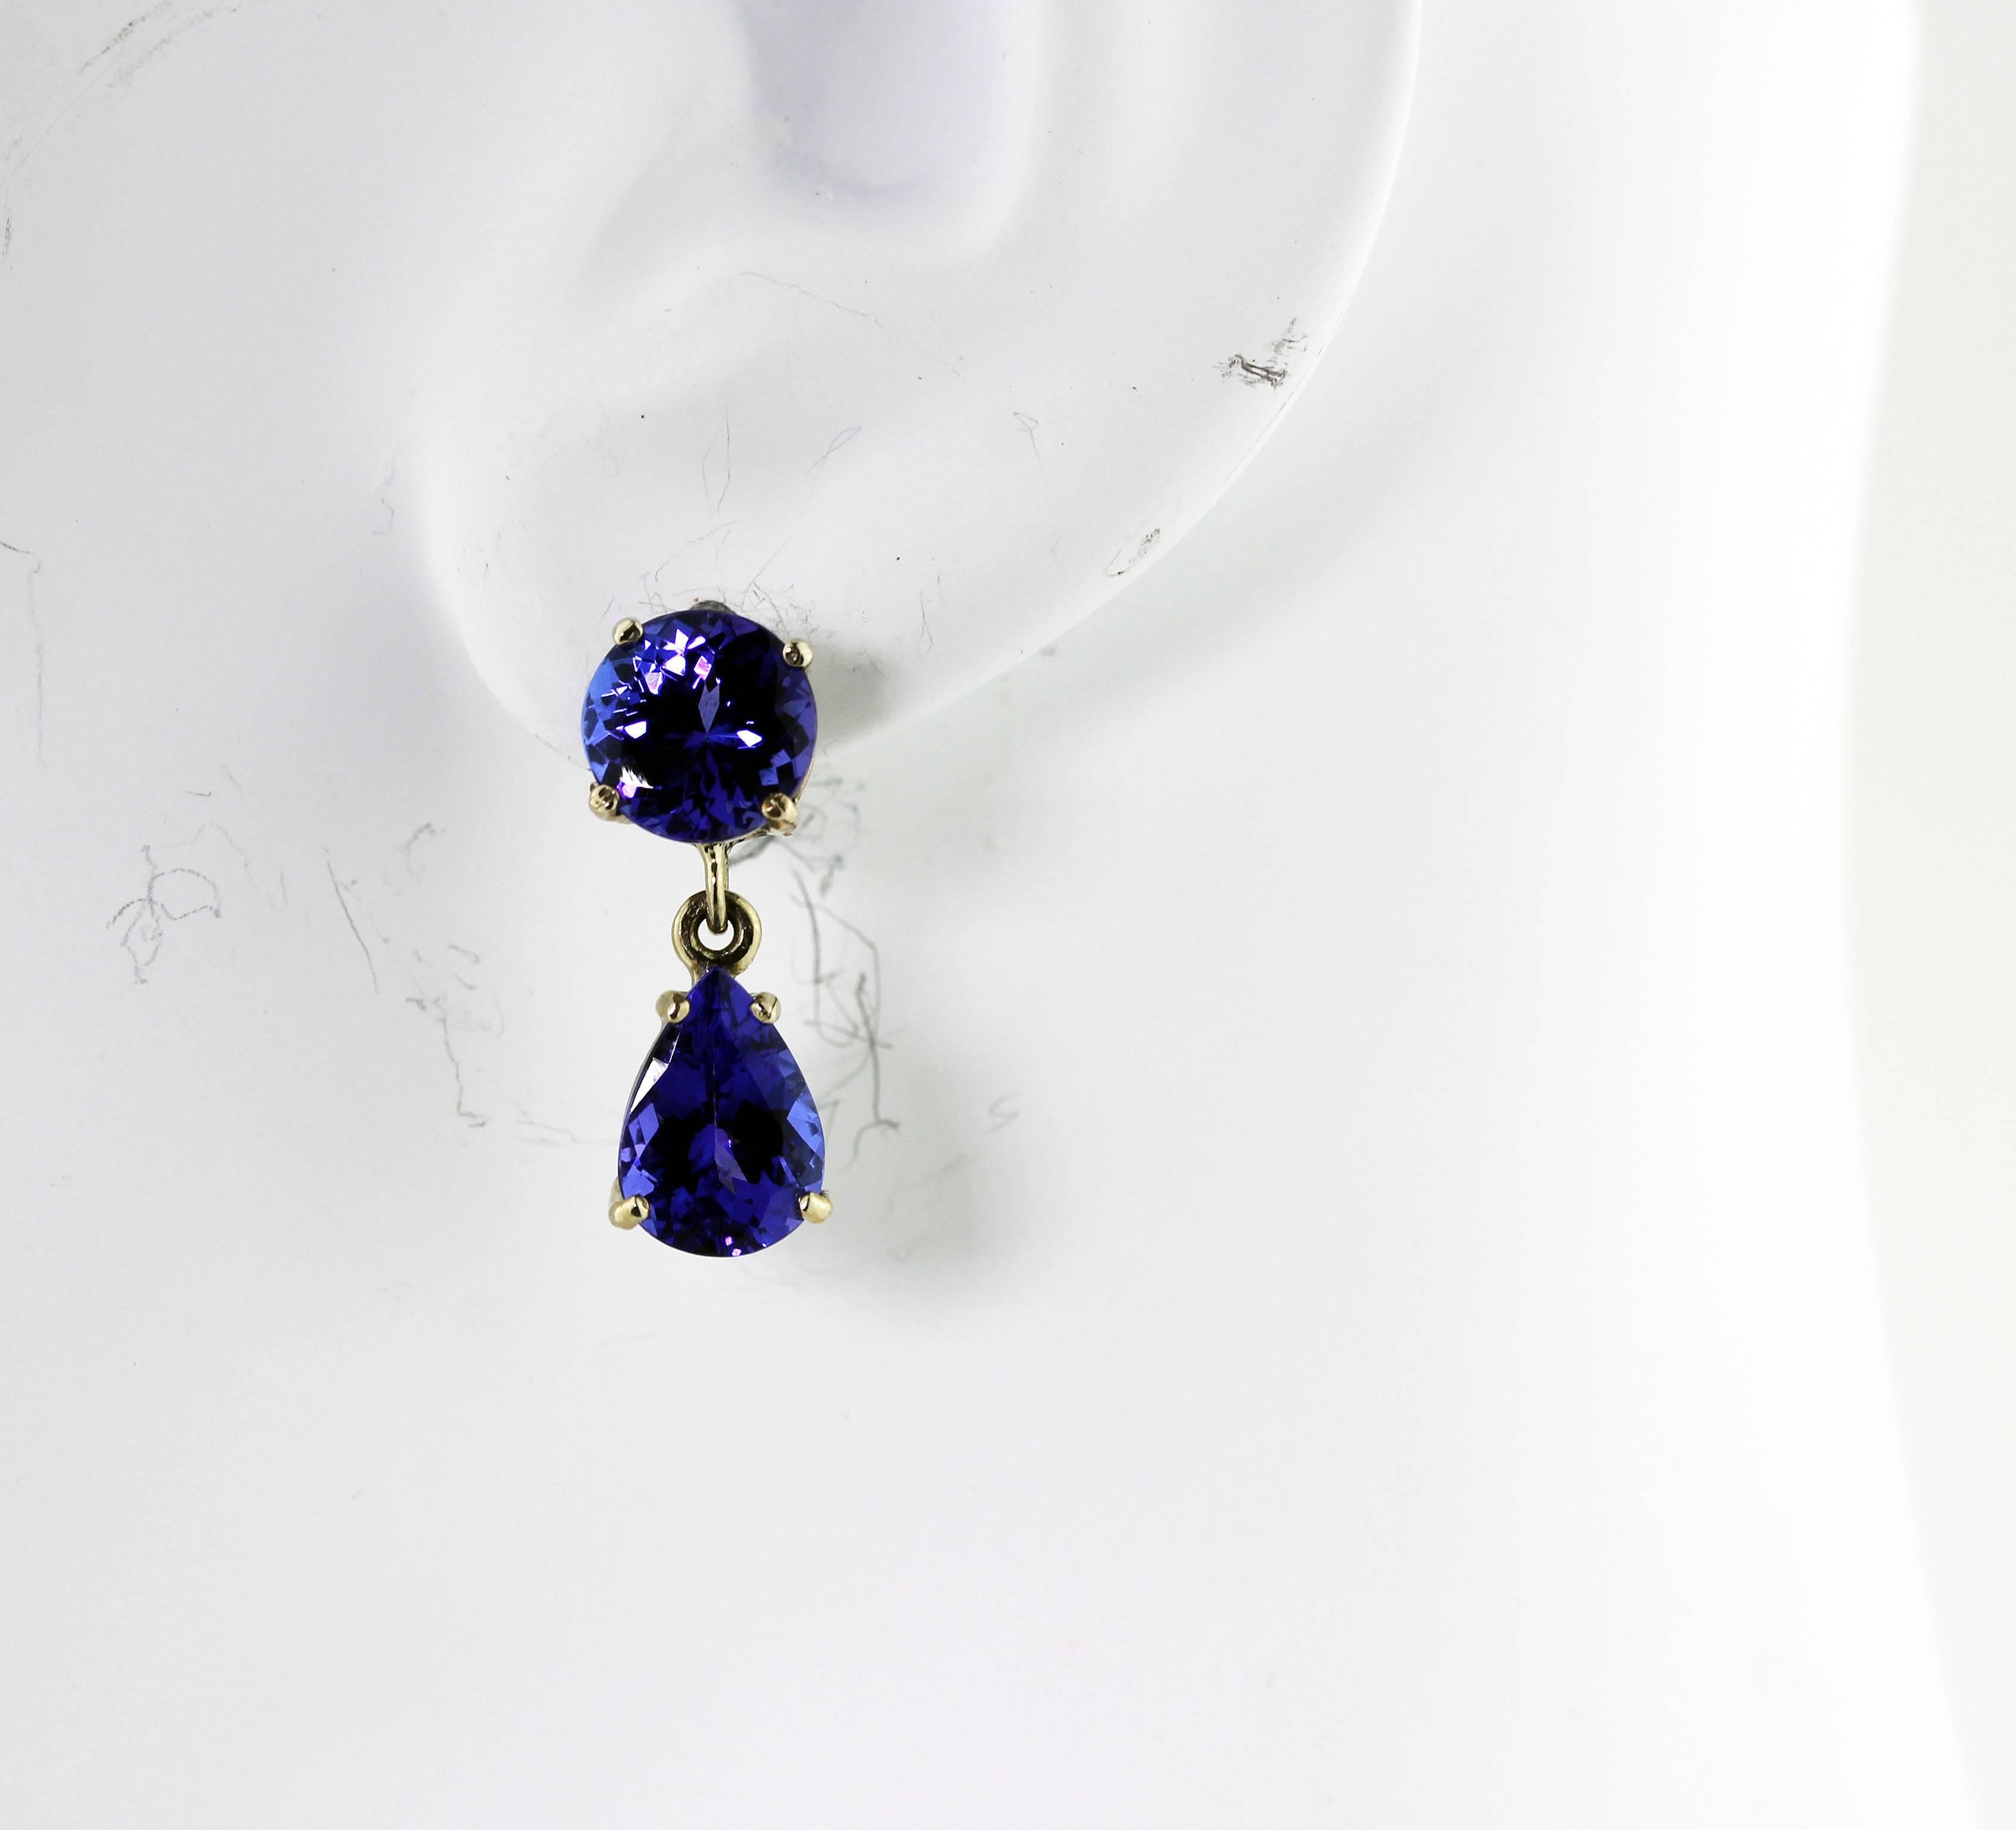 Brilliant unique AAAA quality sparkling 2 carats each of pear cut blue Tanzanites swing gracefully from the 1.78 carats each of round glittering AAAA quality blue Tanzanites set in handmade white gold stud earrings.   They dangle .82 inch from top